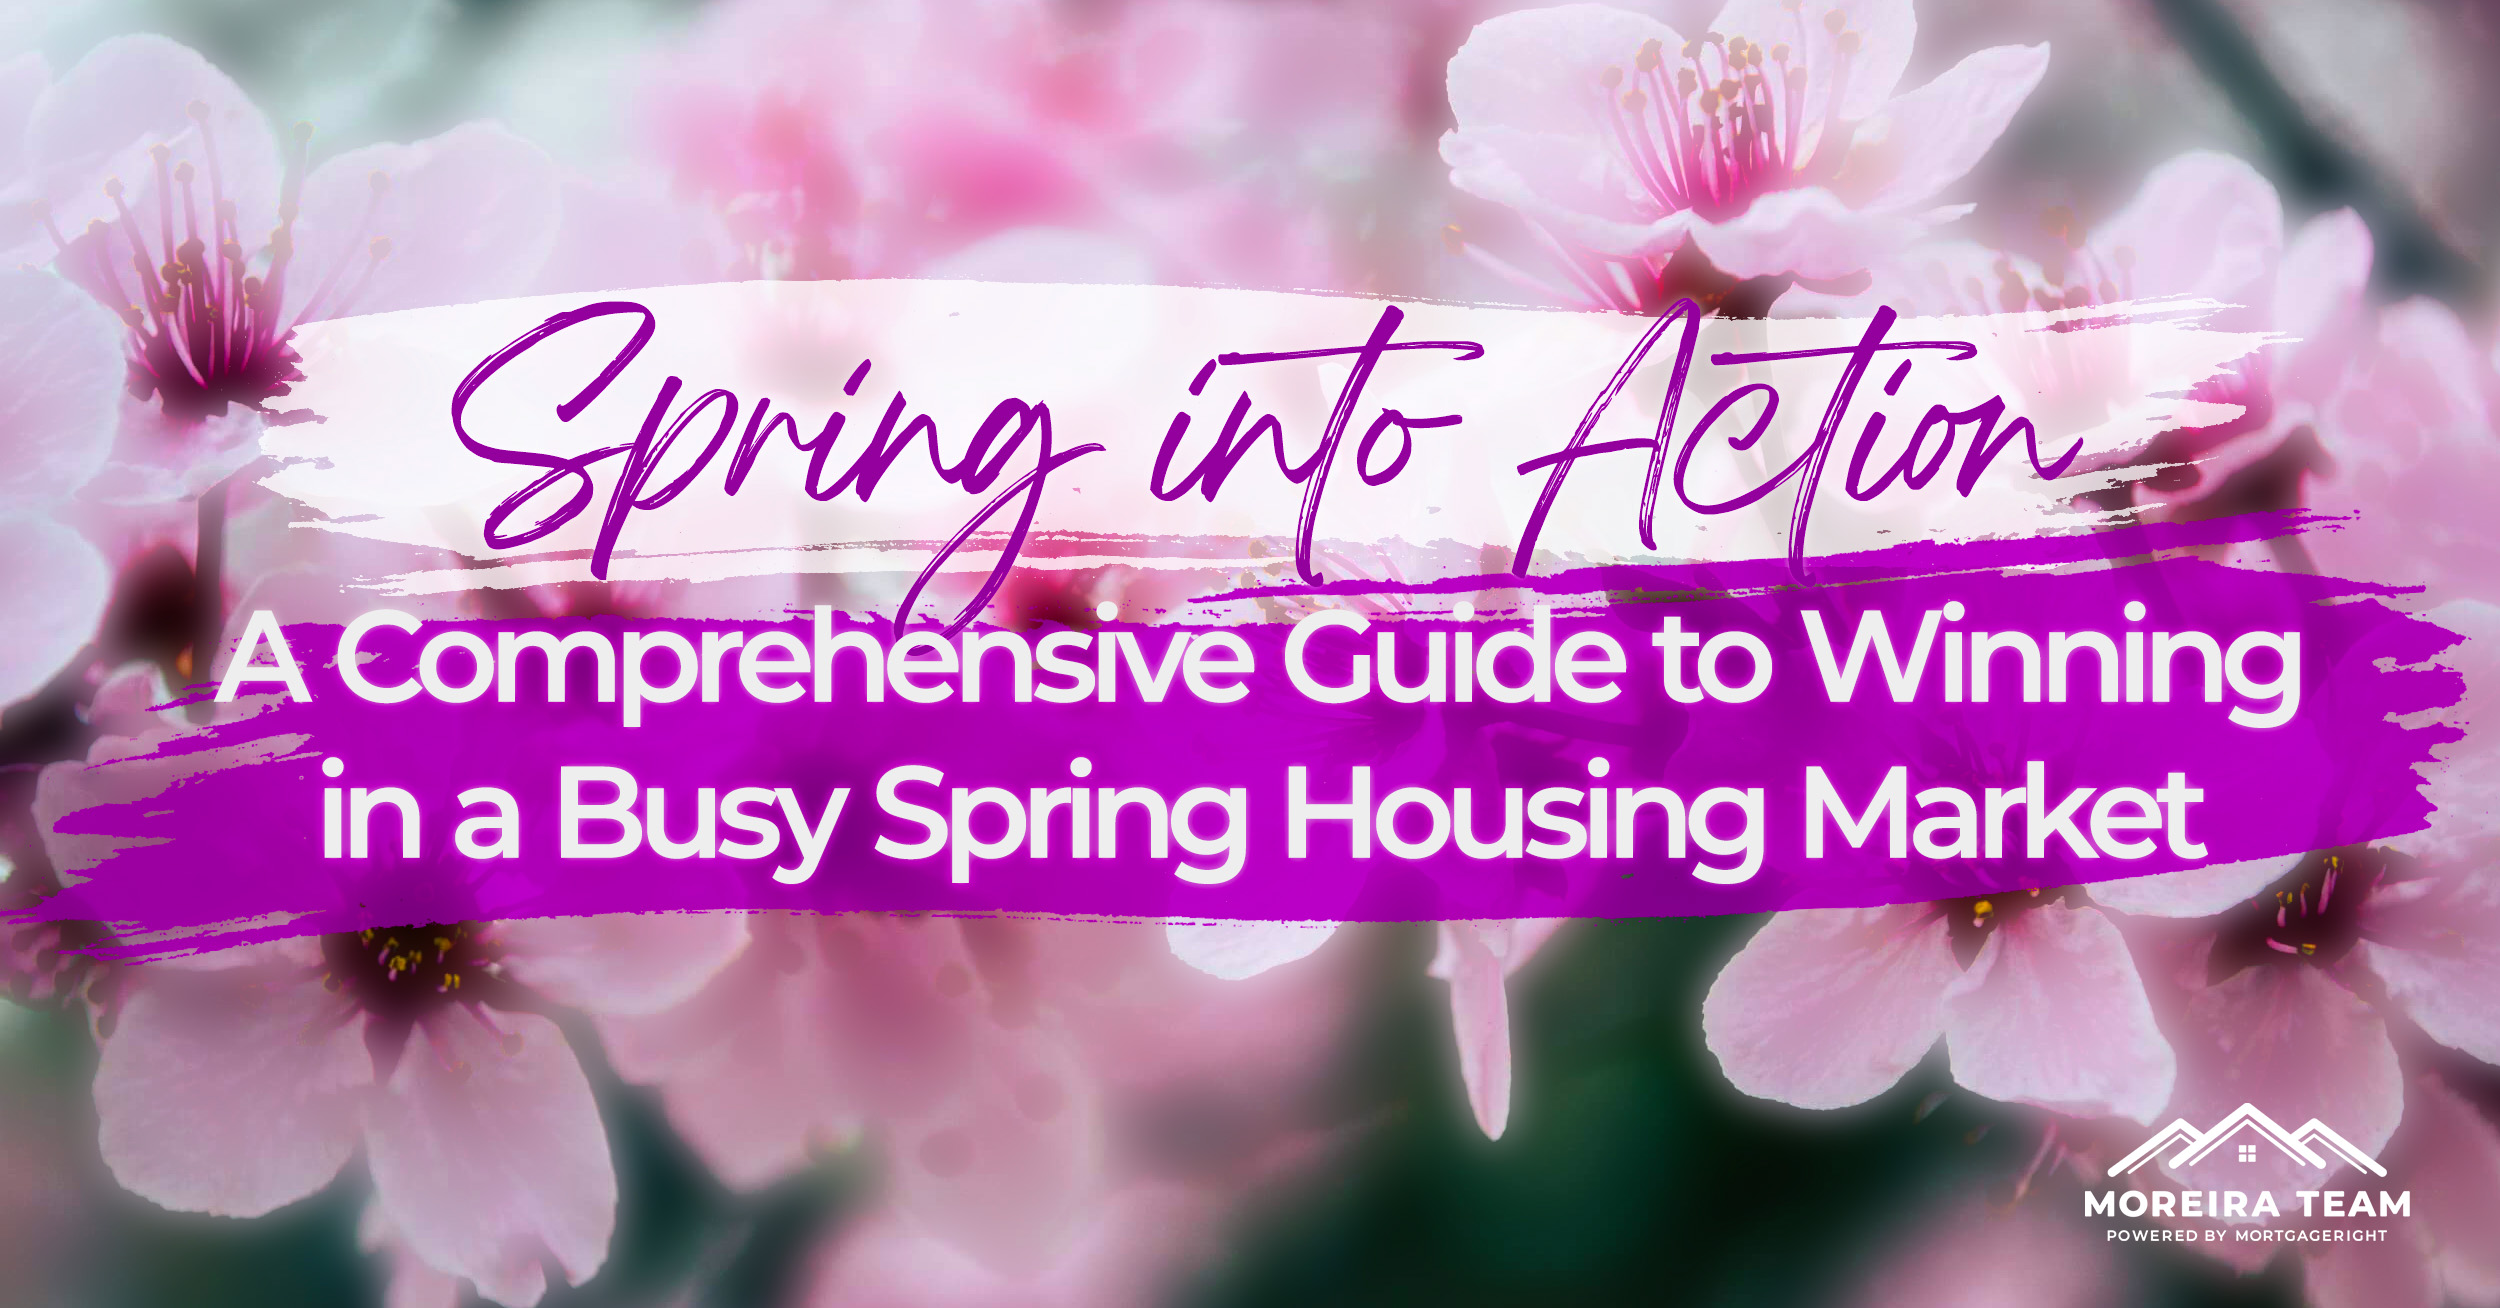 Spring into Action: A Comprehensive Guide to Winning in a Busy Spring Housing Market